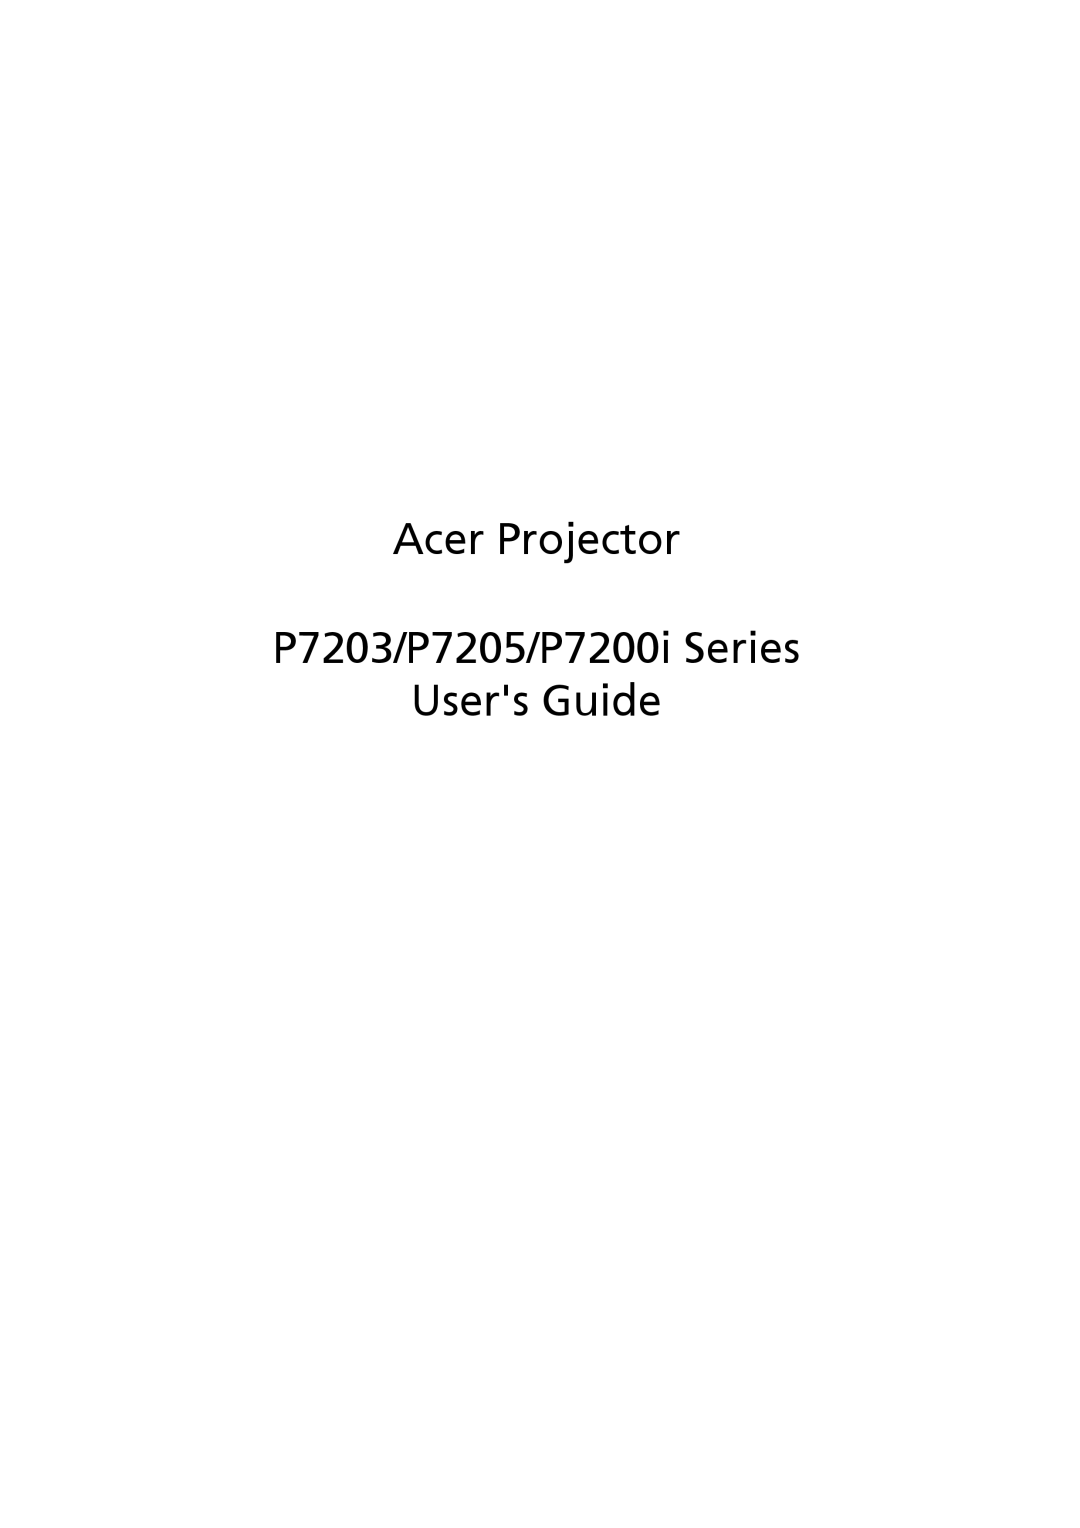 Acer manual Acer Projector P7203/P7205/P7200i Series Users Guide 